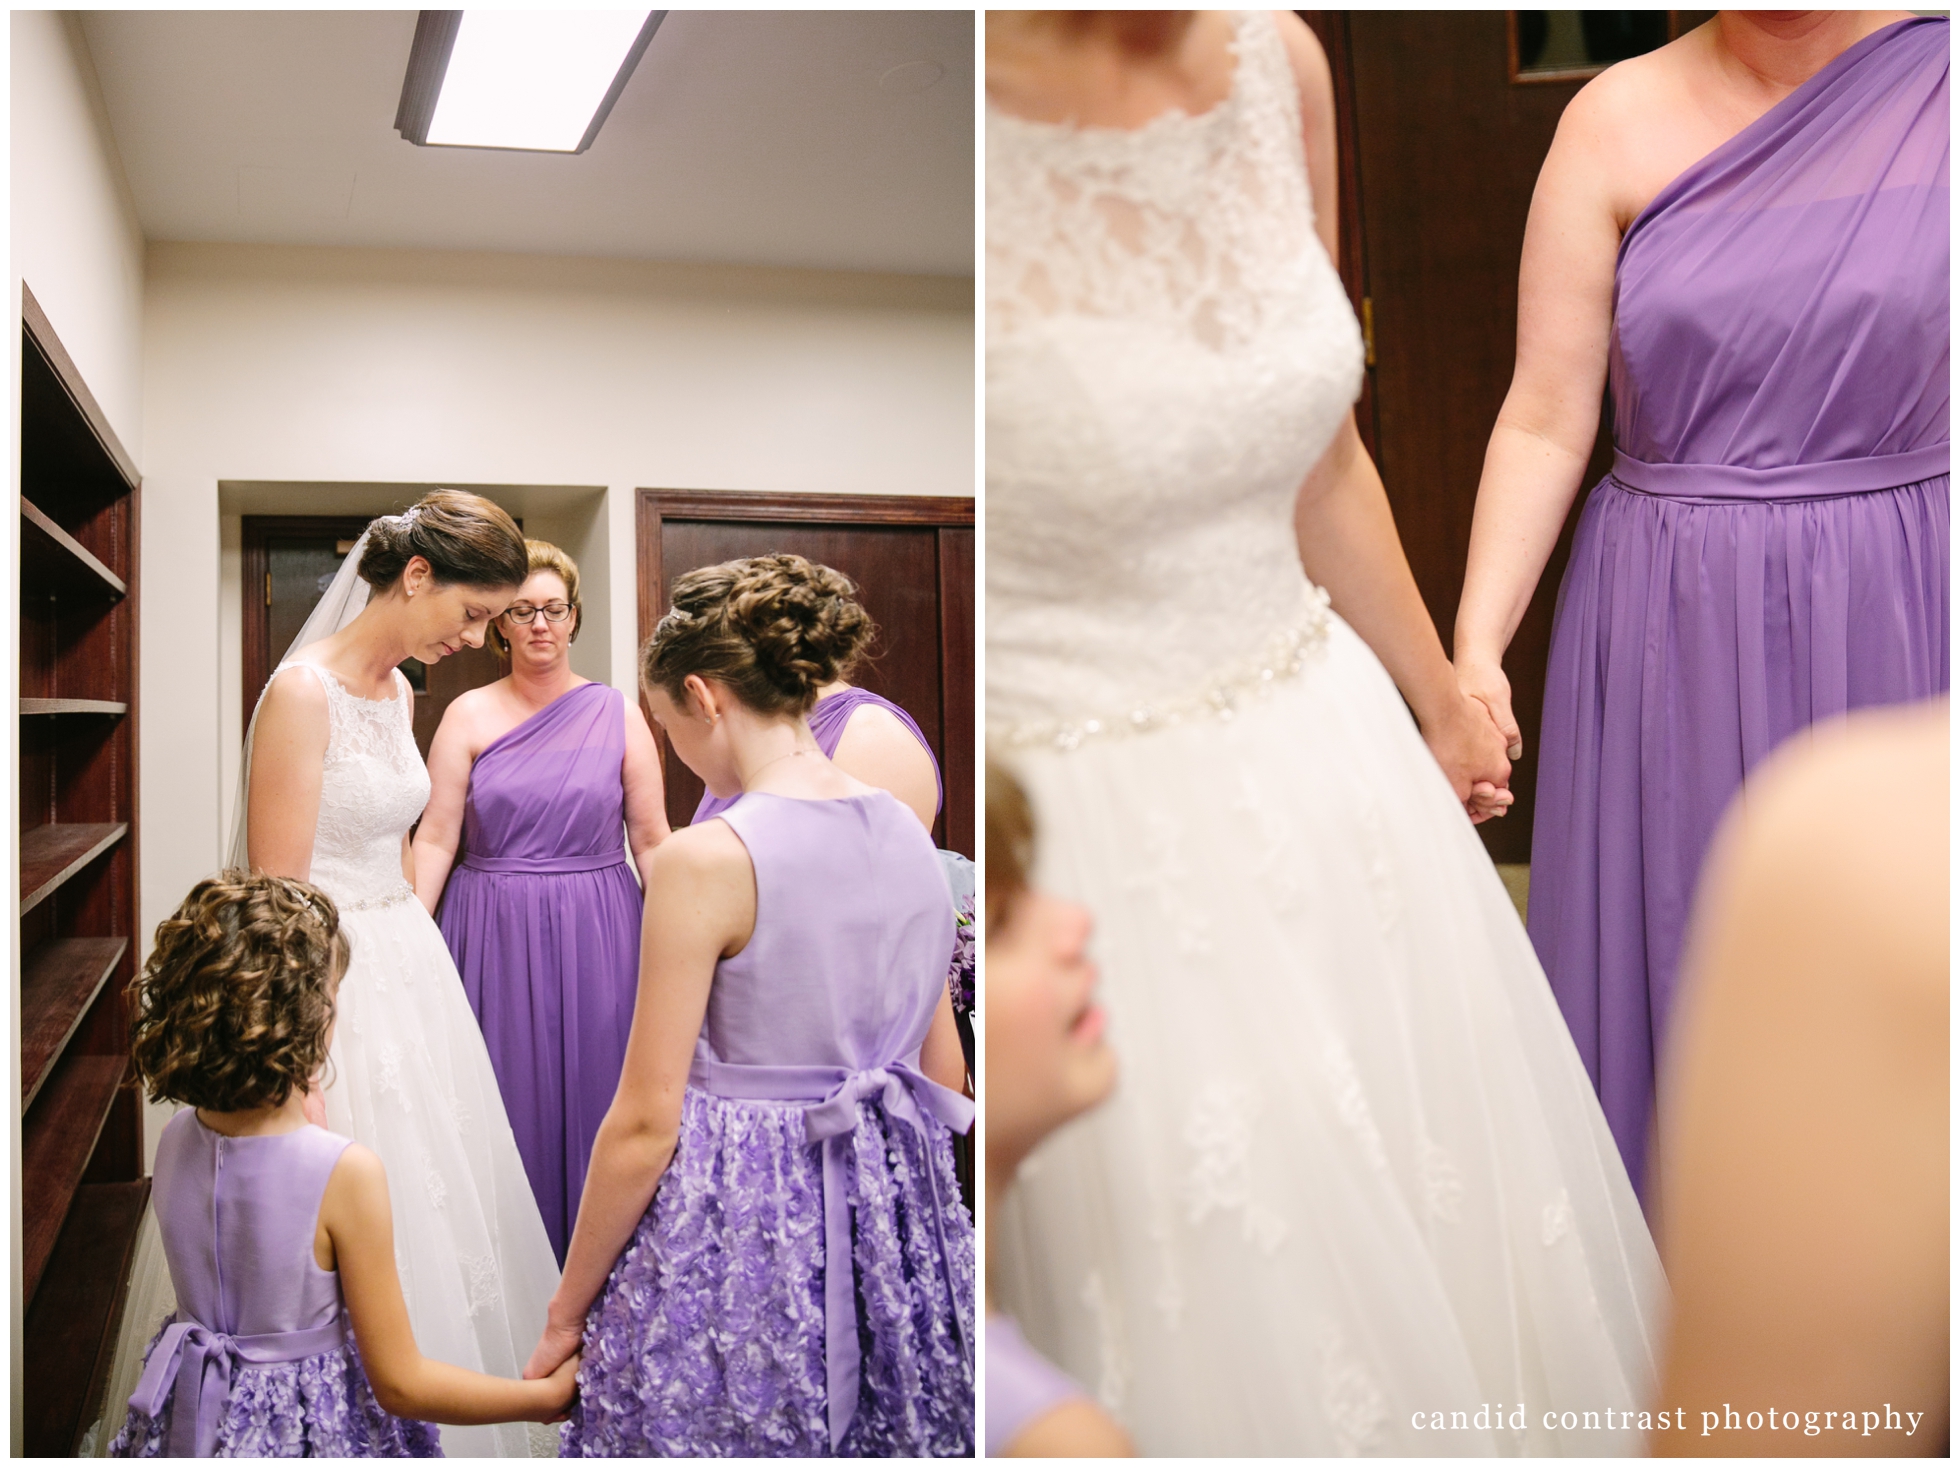 prayer before classic Dubuque iowa wedding at the grand river center, candid contrast photography